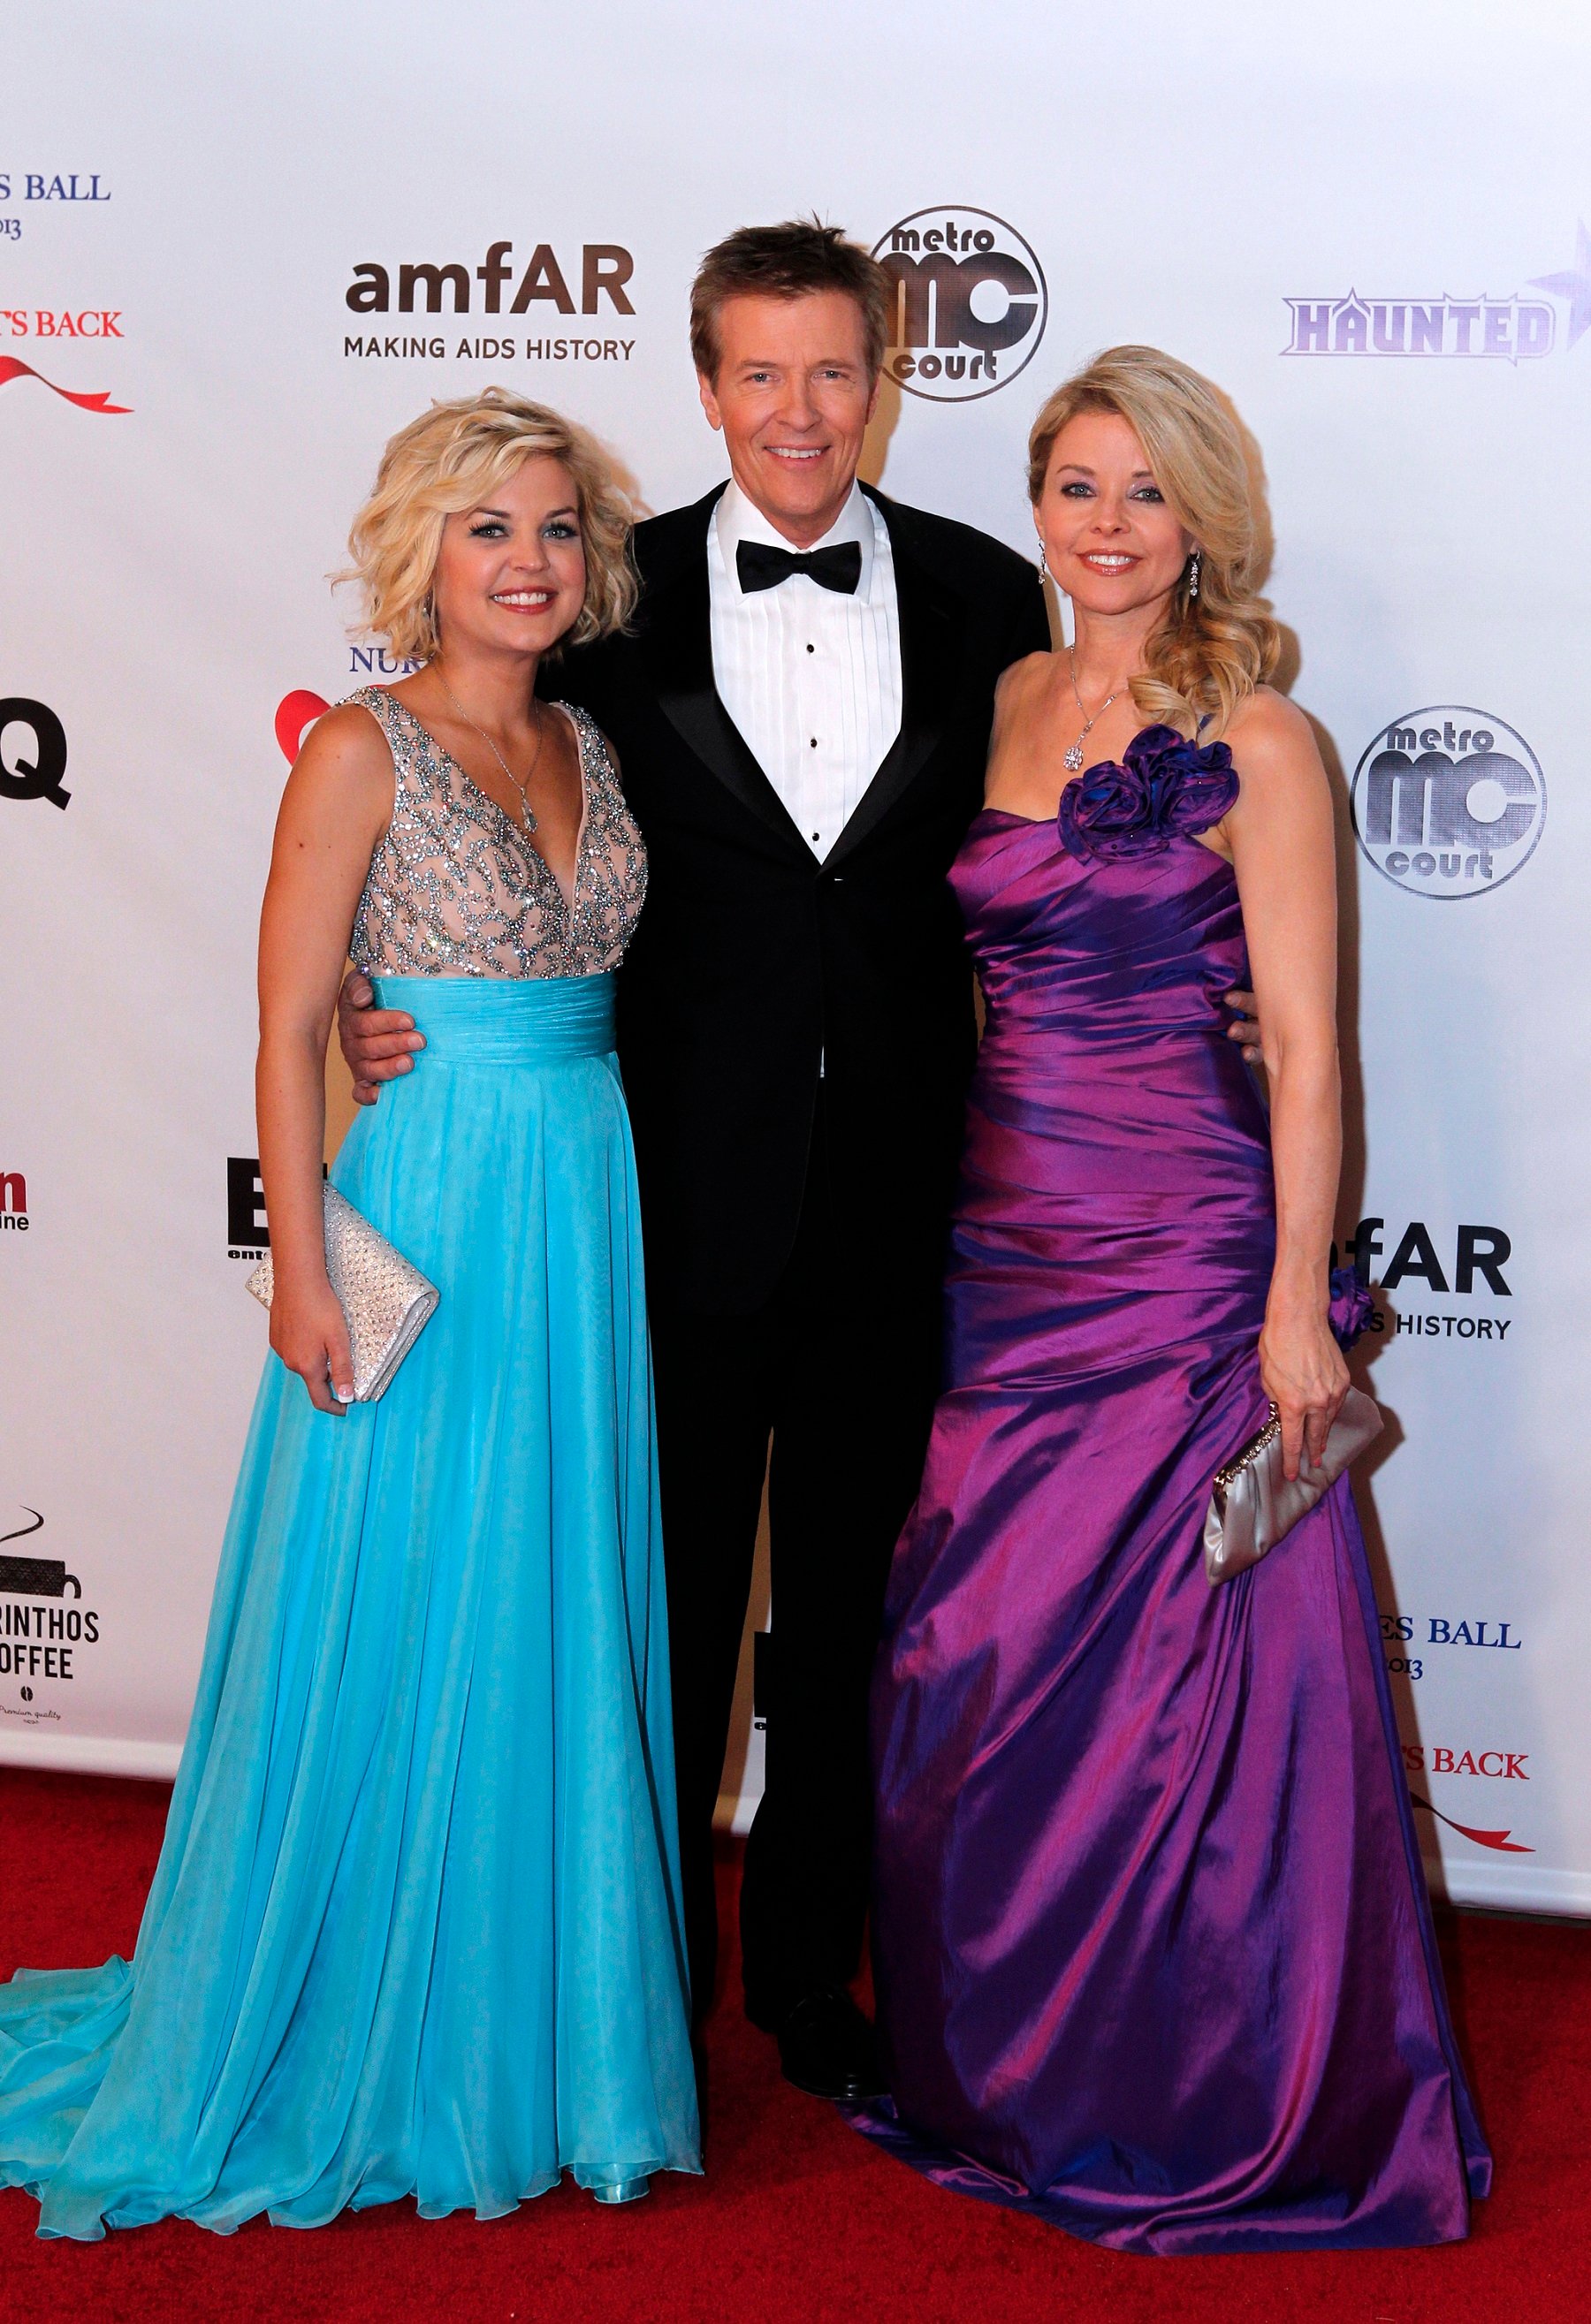 General Hospital "first family" Frisco and Felicia Jones with their daughter, maxie